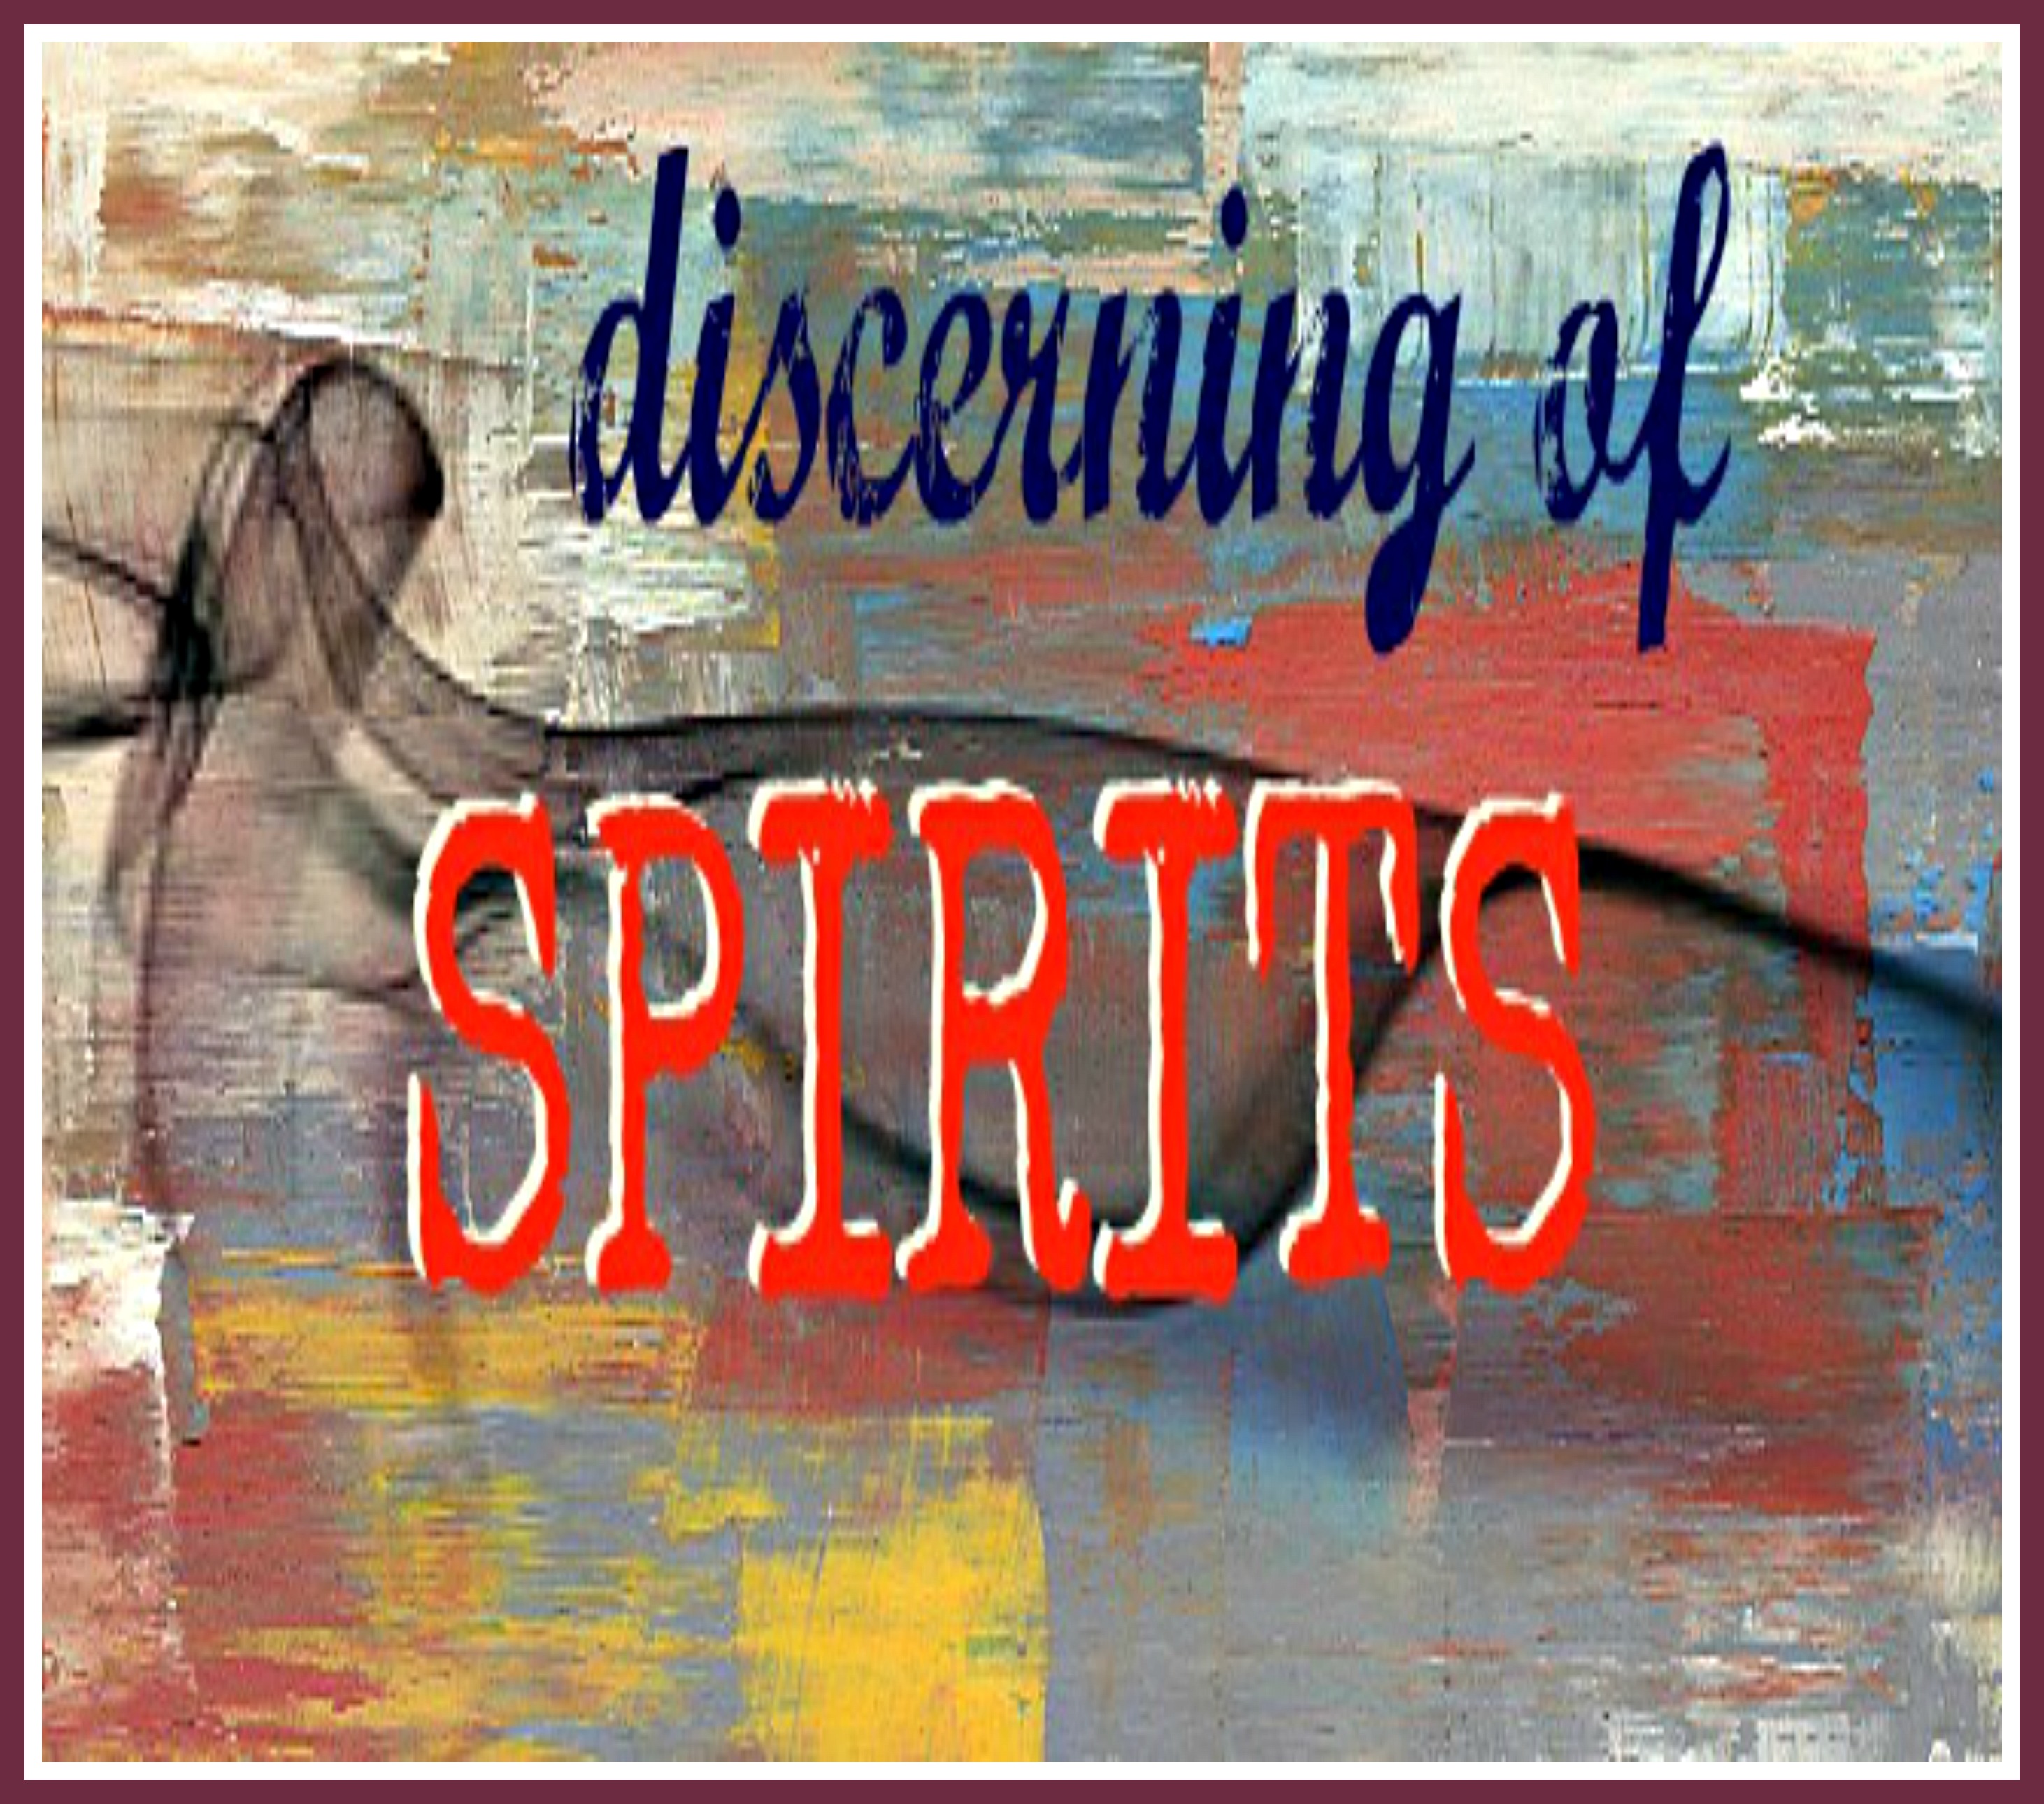 spirit of discernment meaning